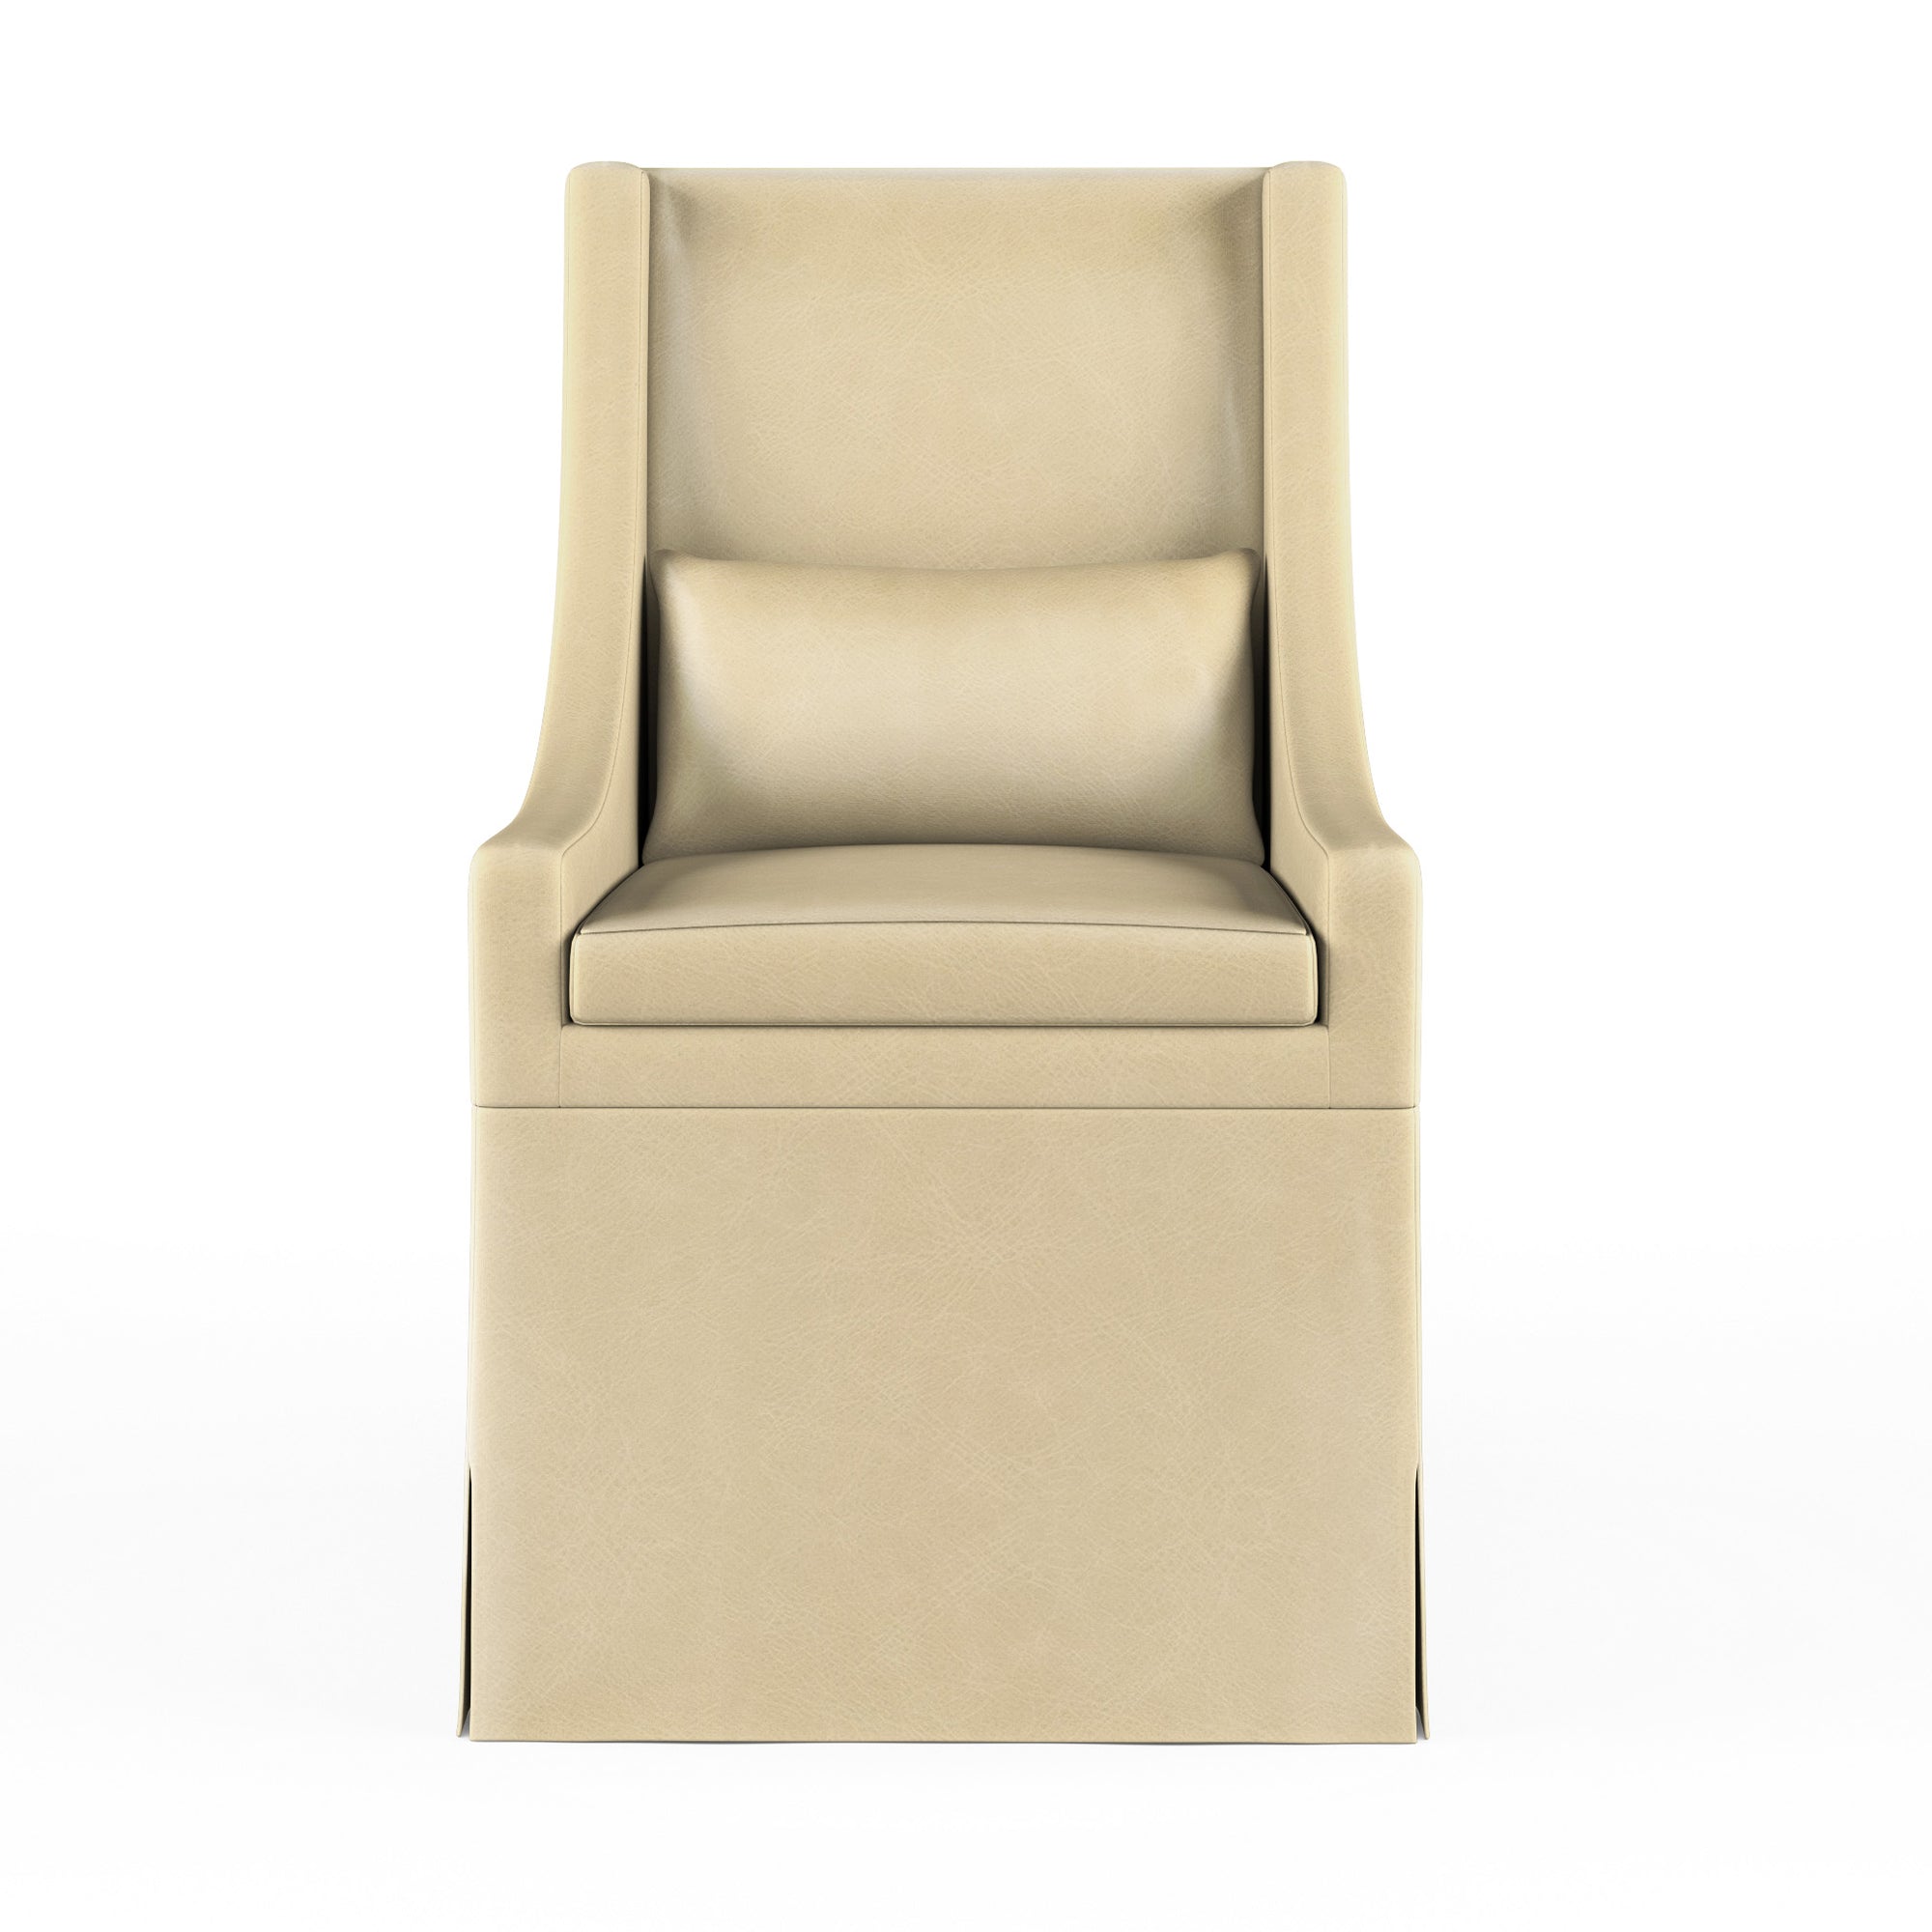 Serena Dining Chair - Oyster Vintage Leather